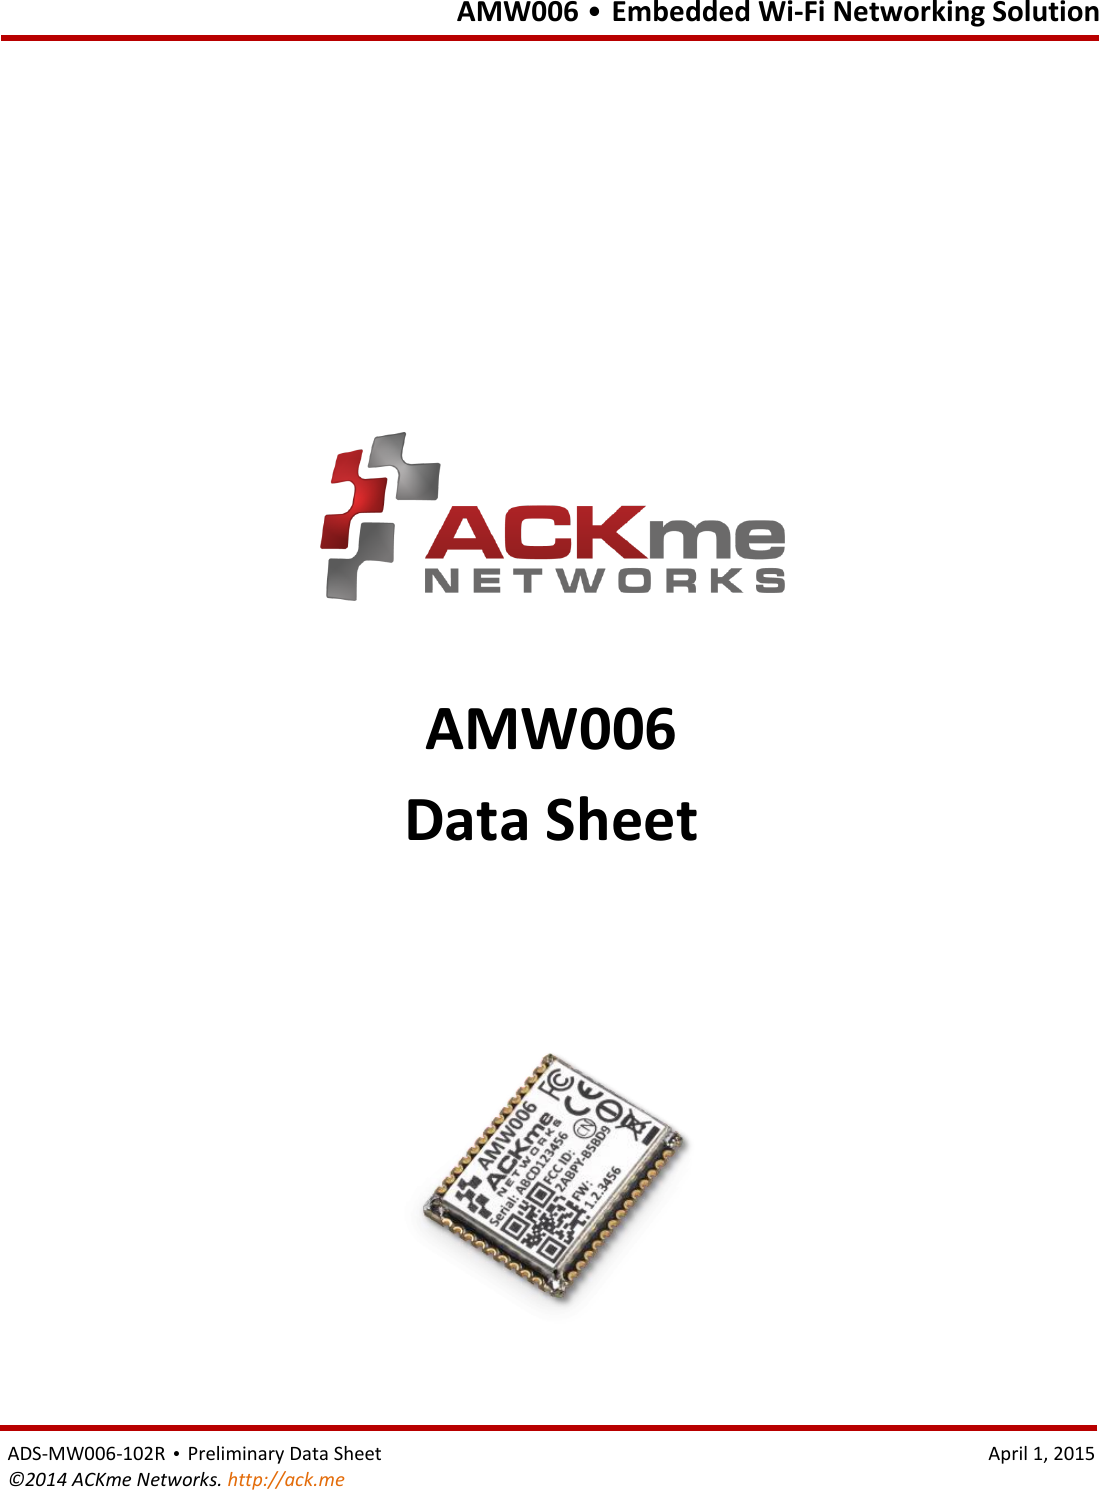   AMW006 • Embedded Wi-Fi Networking Solution  ADS-MW006-102R • Preliminary Data Sheet    April 1, 2015 ©2014 ACKme Networks. http://ack.me                                AMW006 Data Sheet  